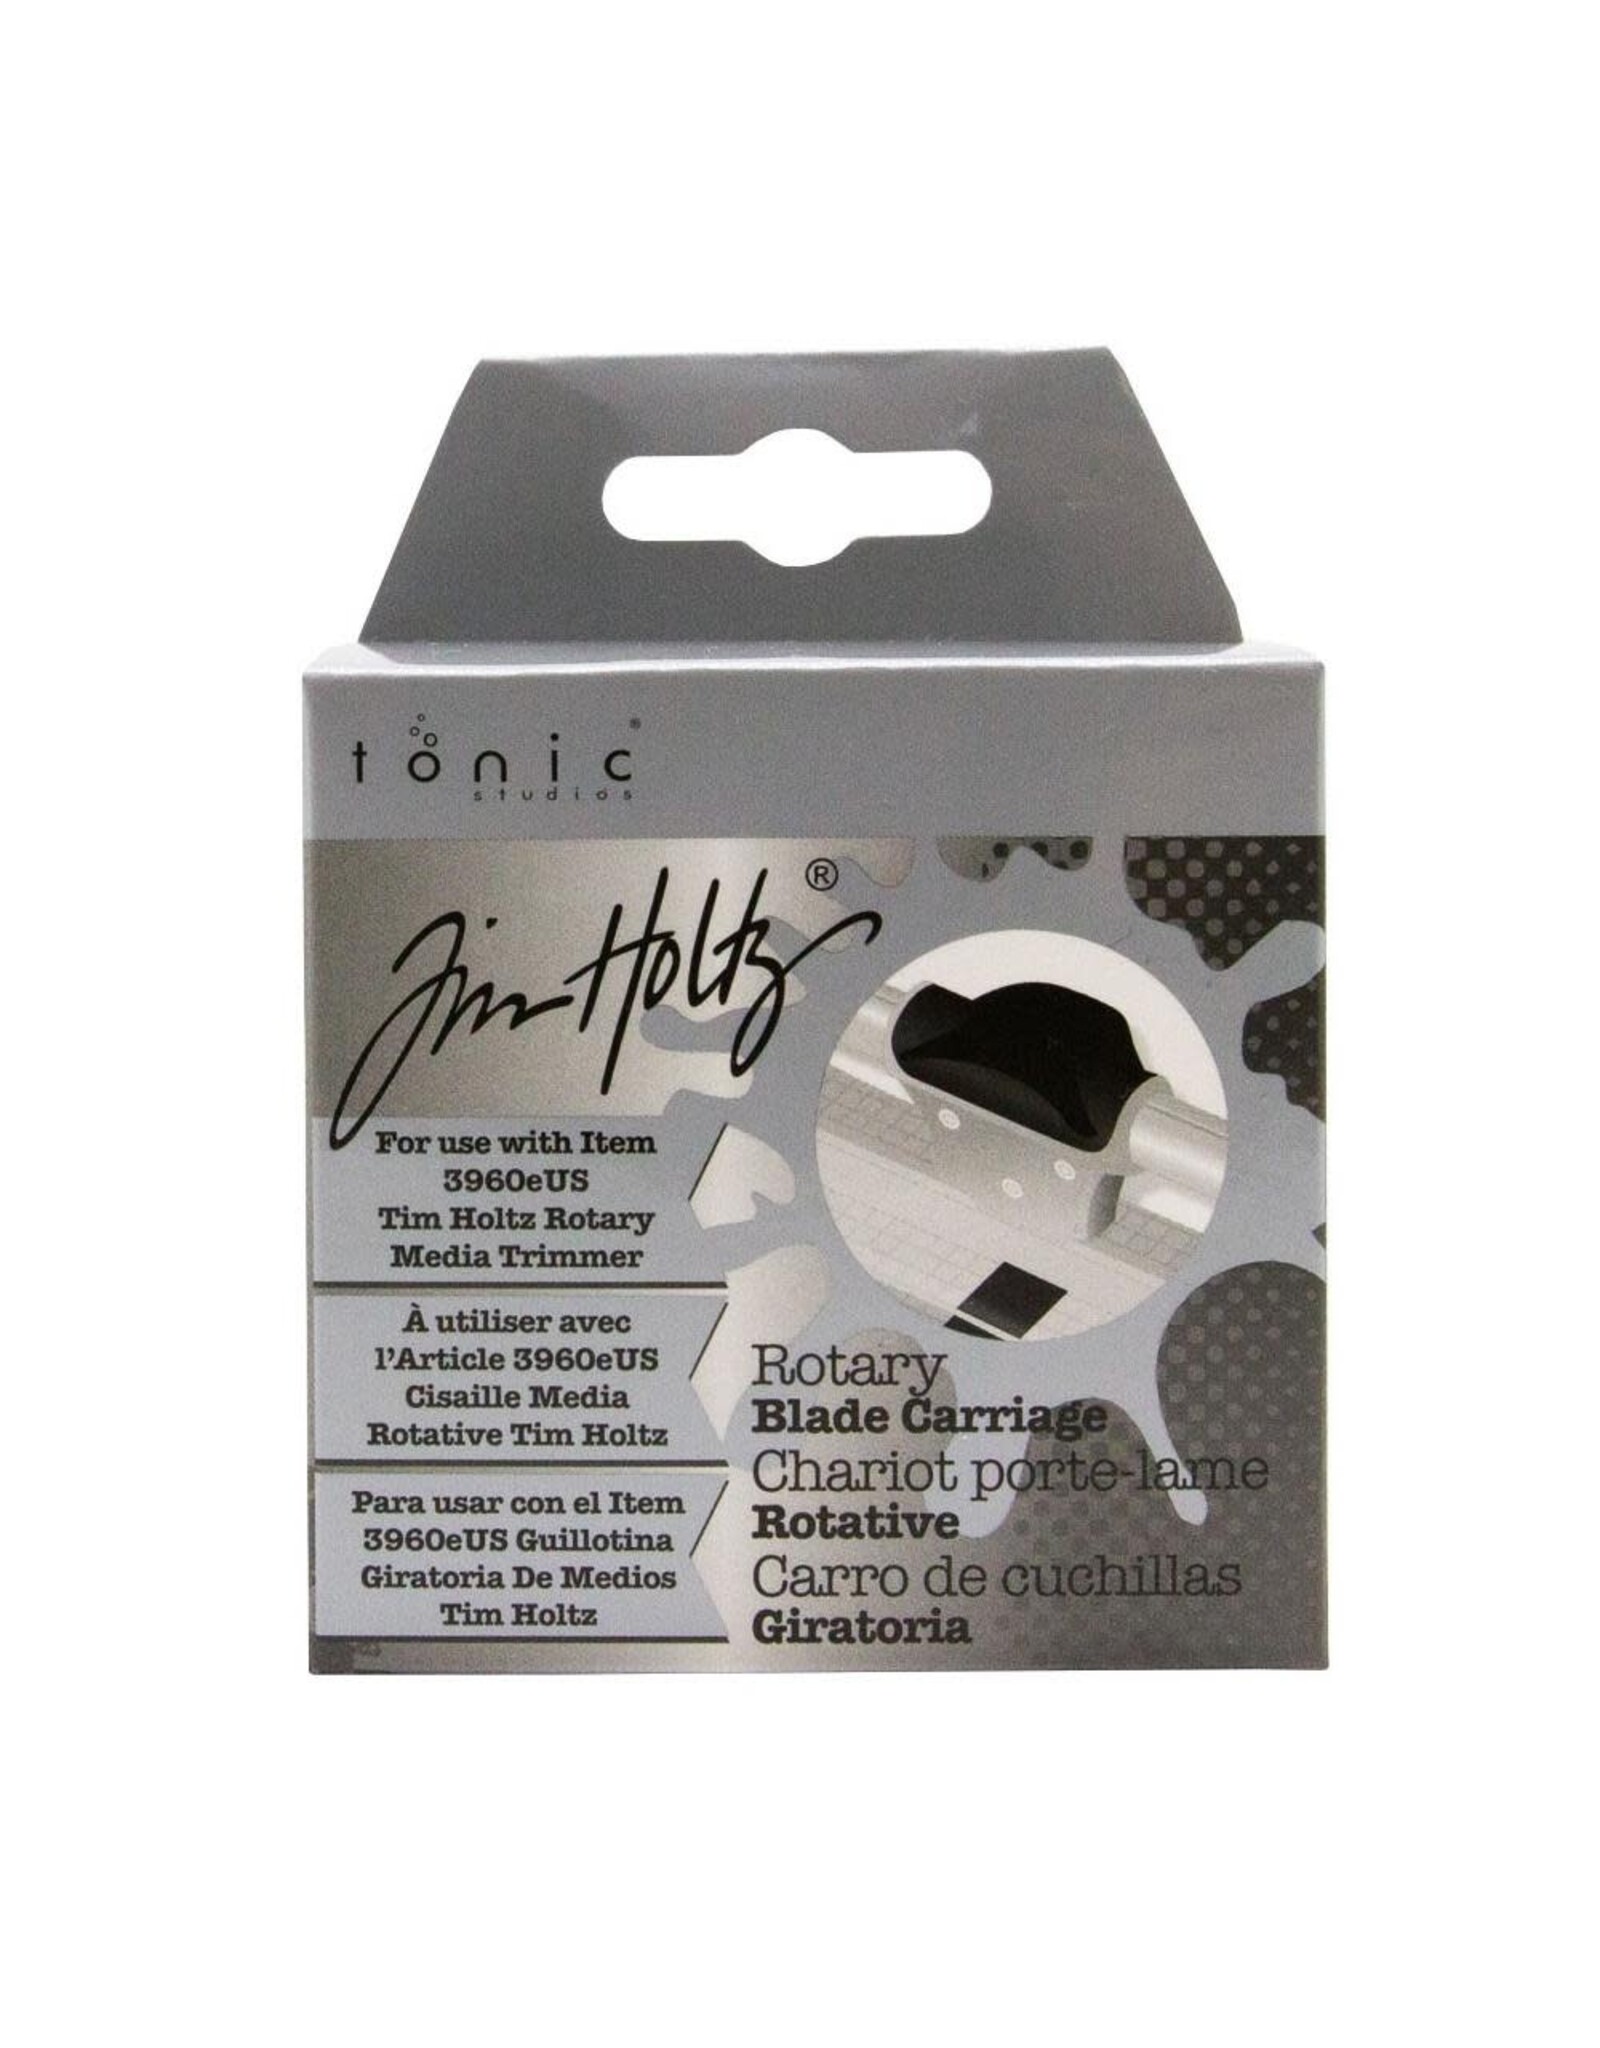 TONIC TONIC STUDIOS TIM HOLTZ ROTARY MEDIA TRIMMER SPARE BLADE CARRIAGE